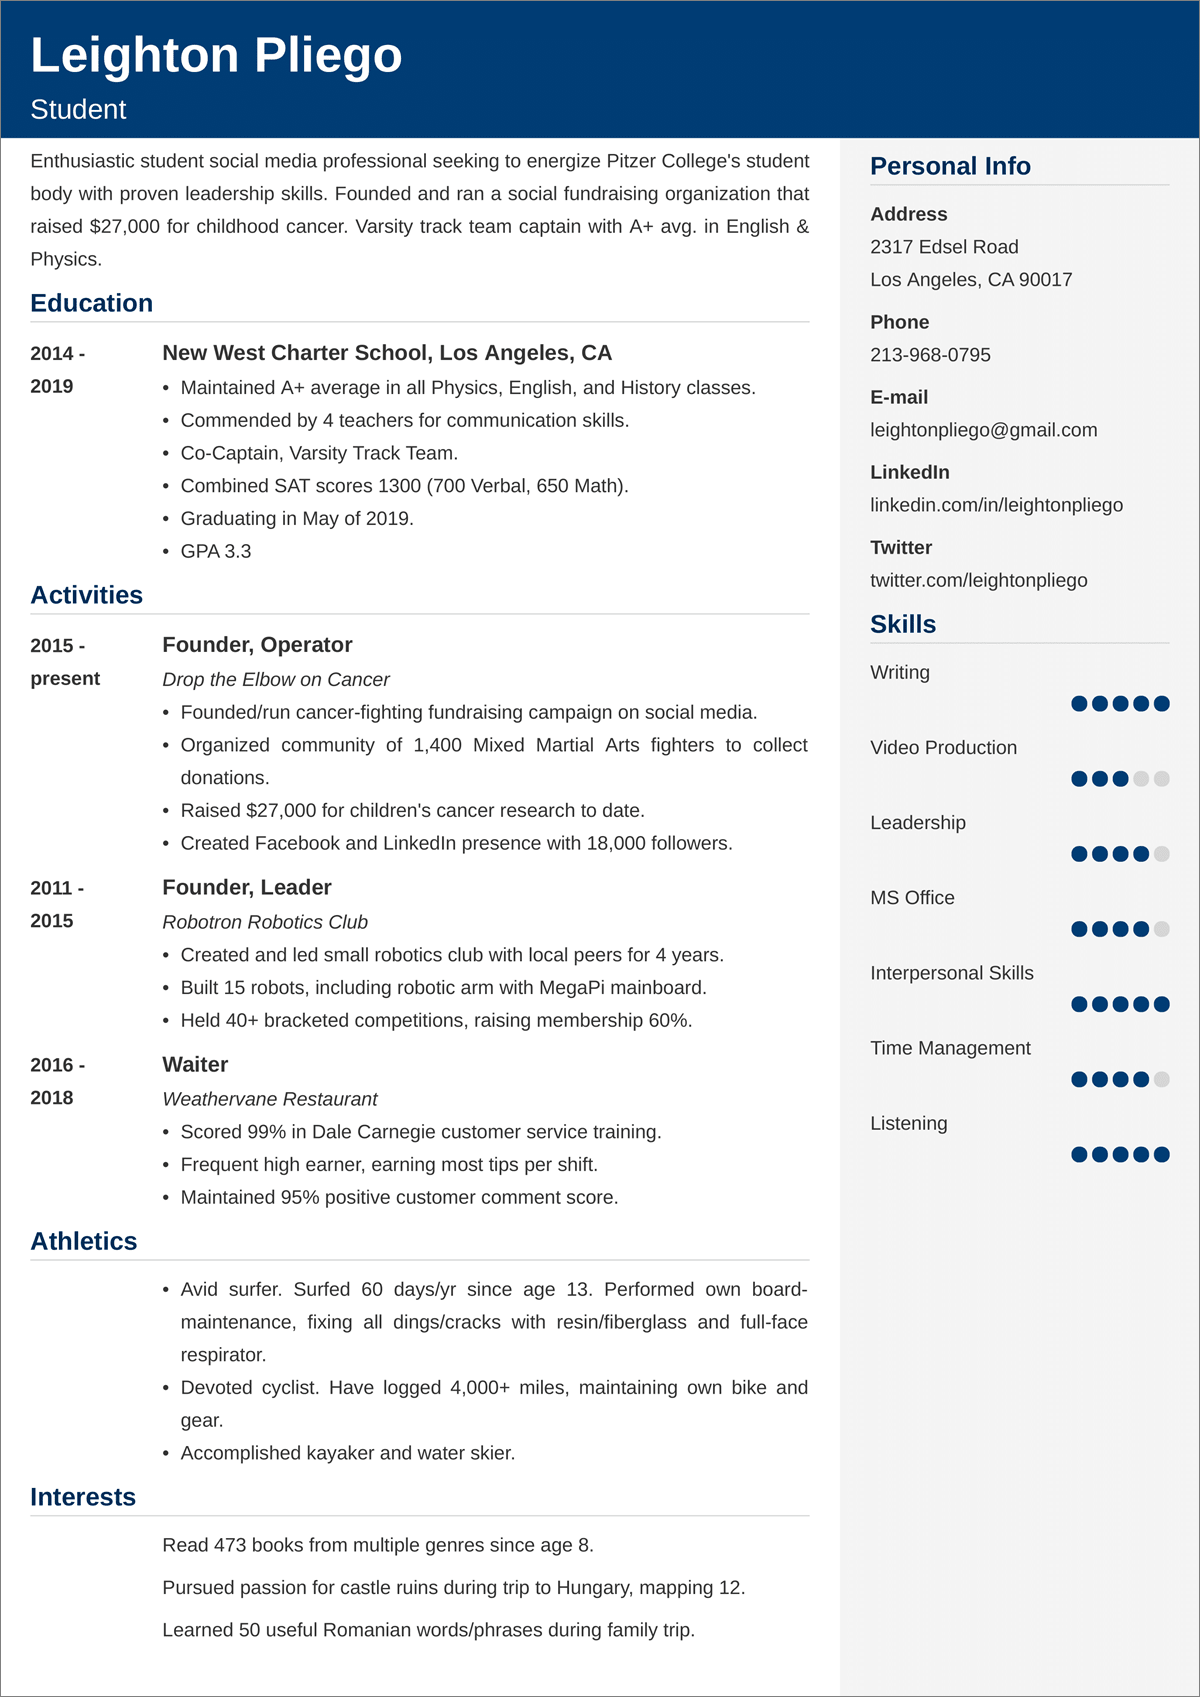 University Application CV Examples, Template, Writing Tips